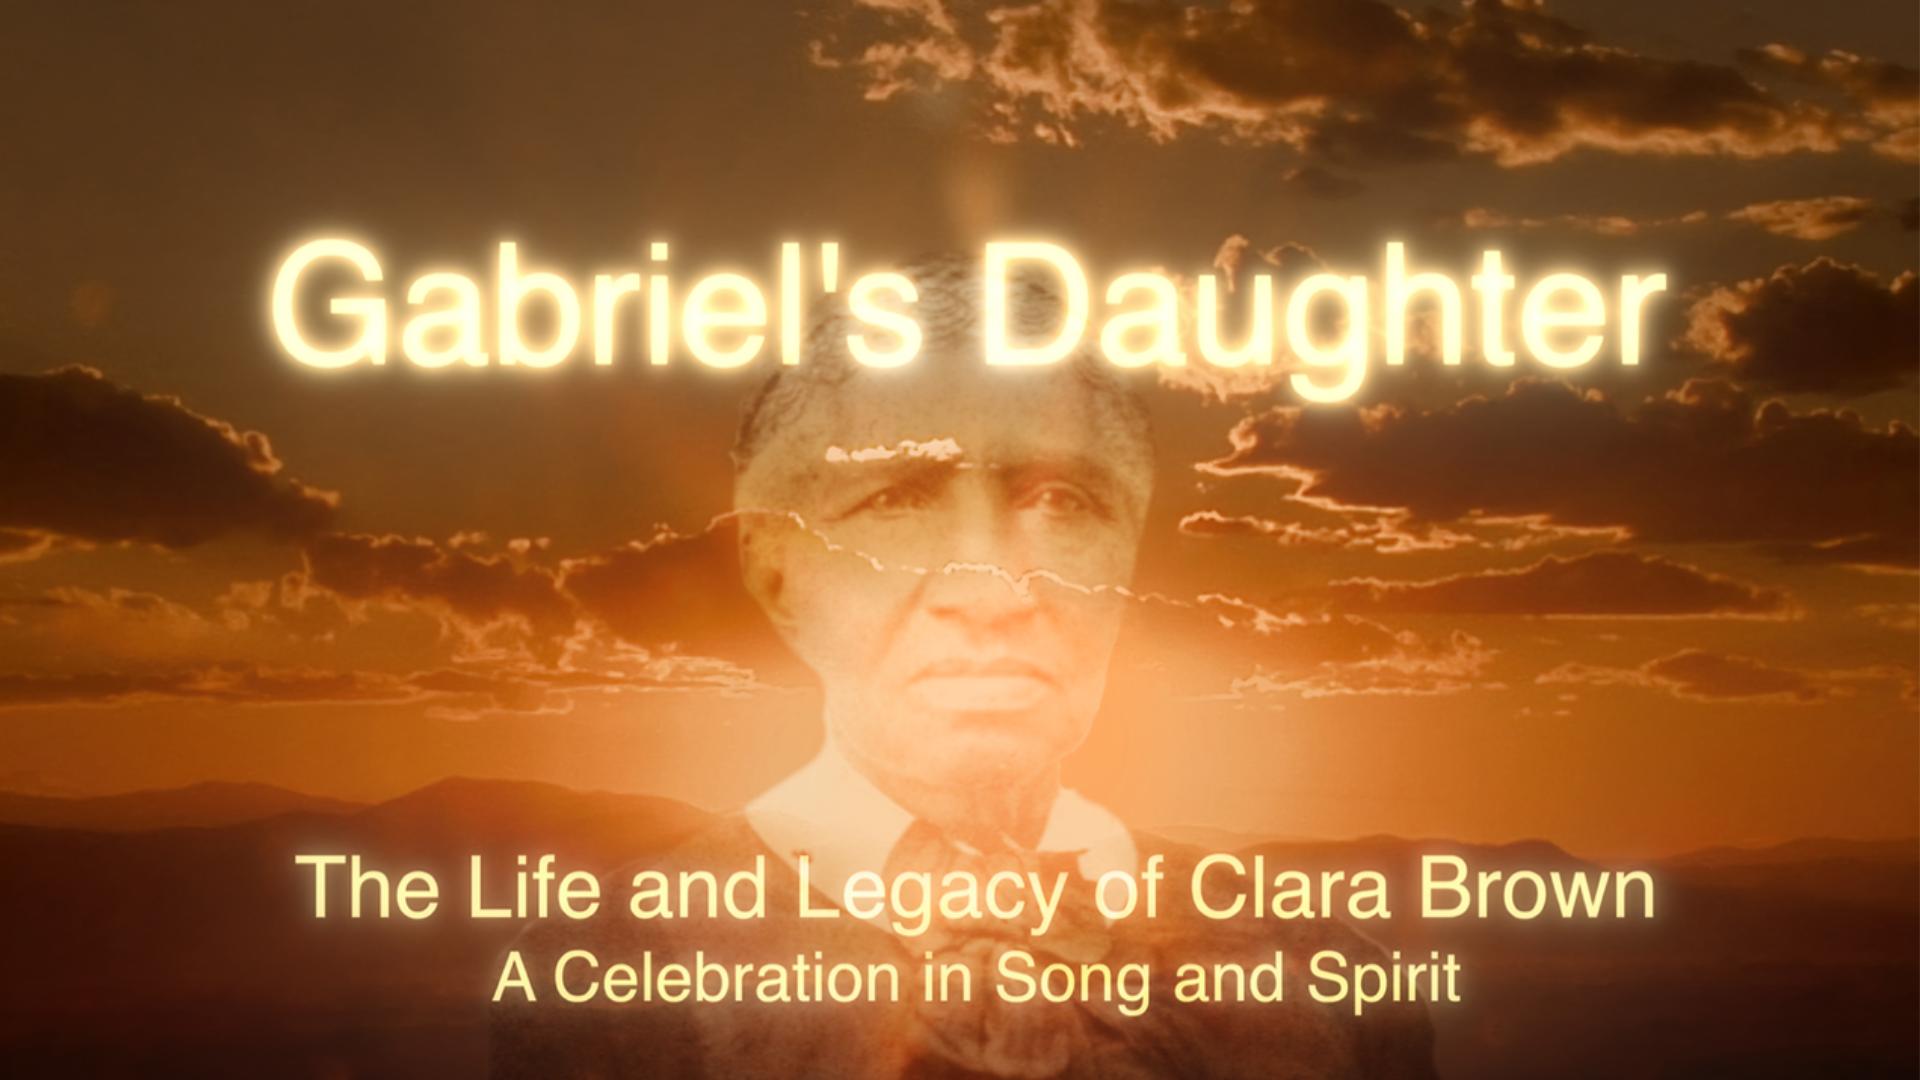 Gabriel's Daughter, The Life and Legacy of Clara Brown